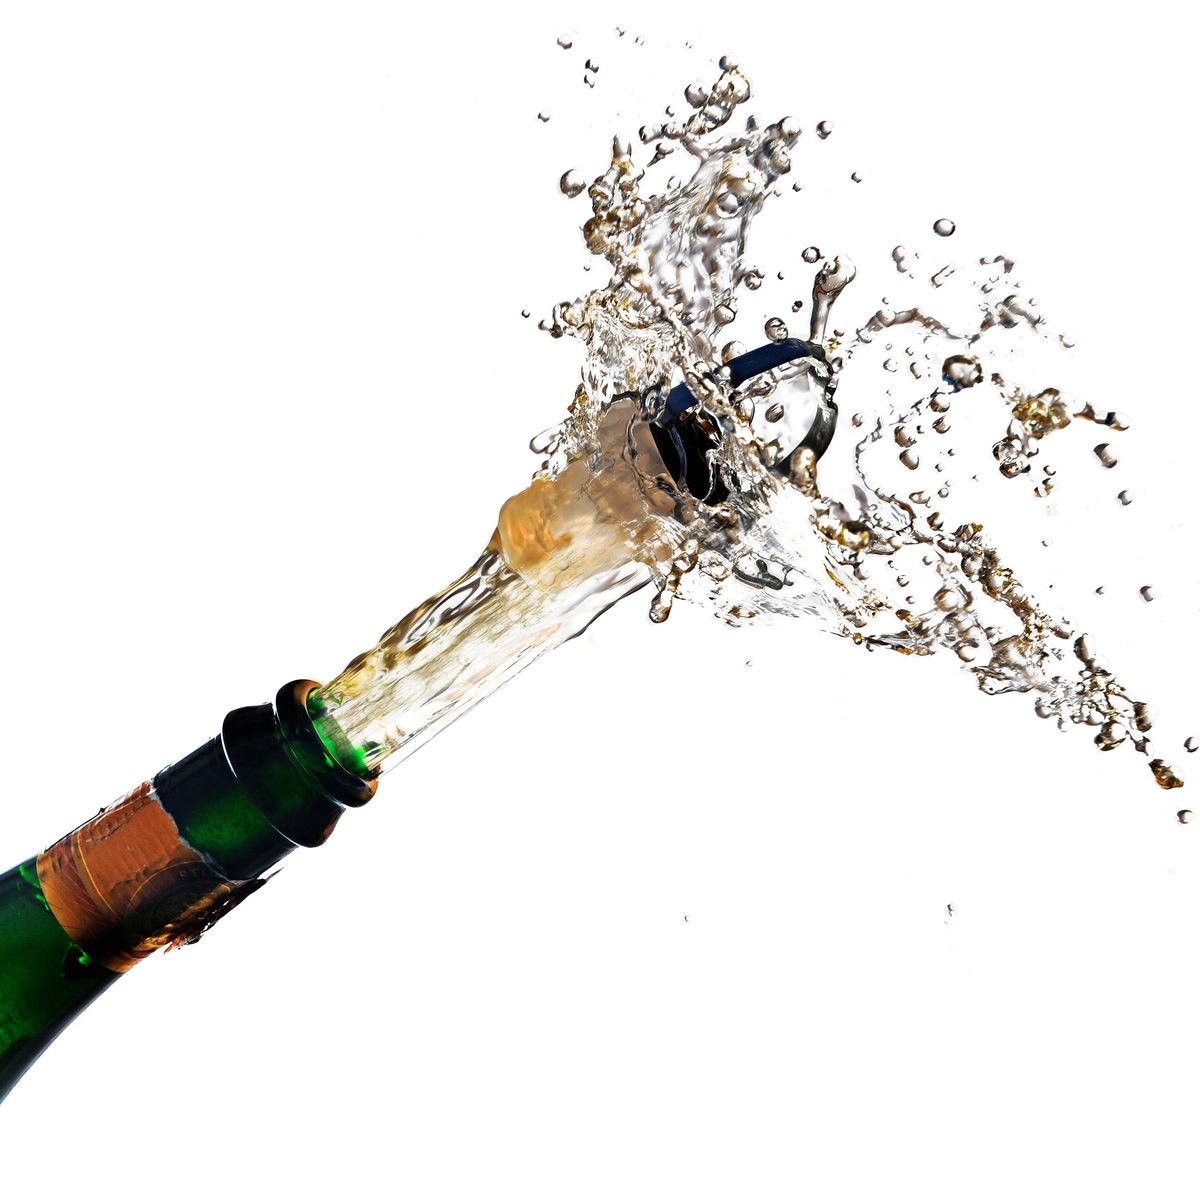 How Popping a Champagne Cork Is Similar to a Supersonic Jet Engine